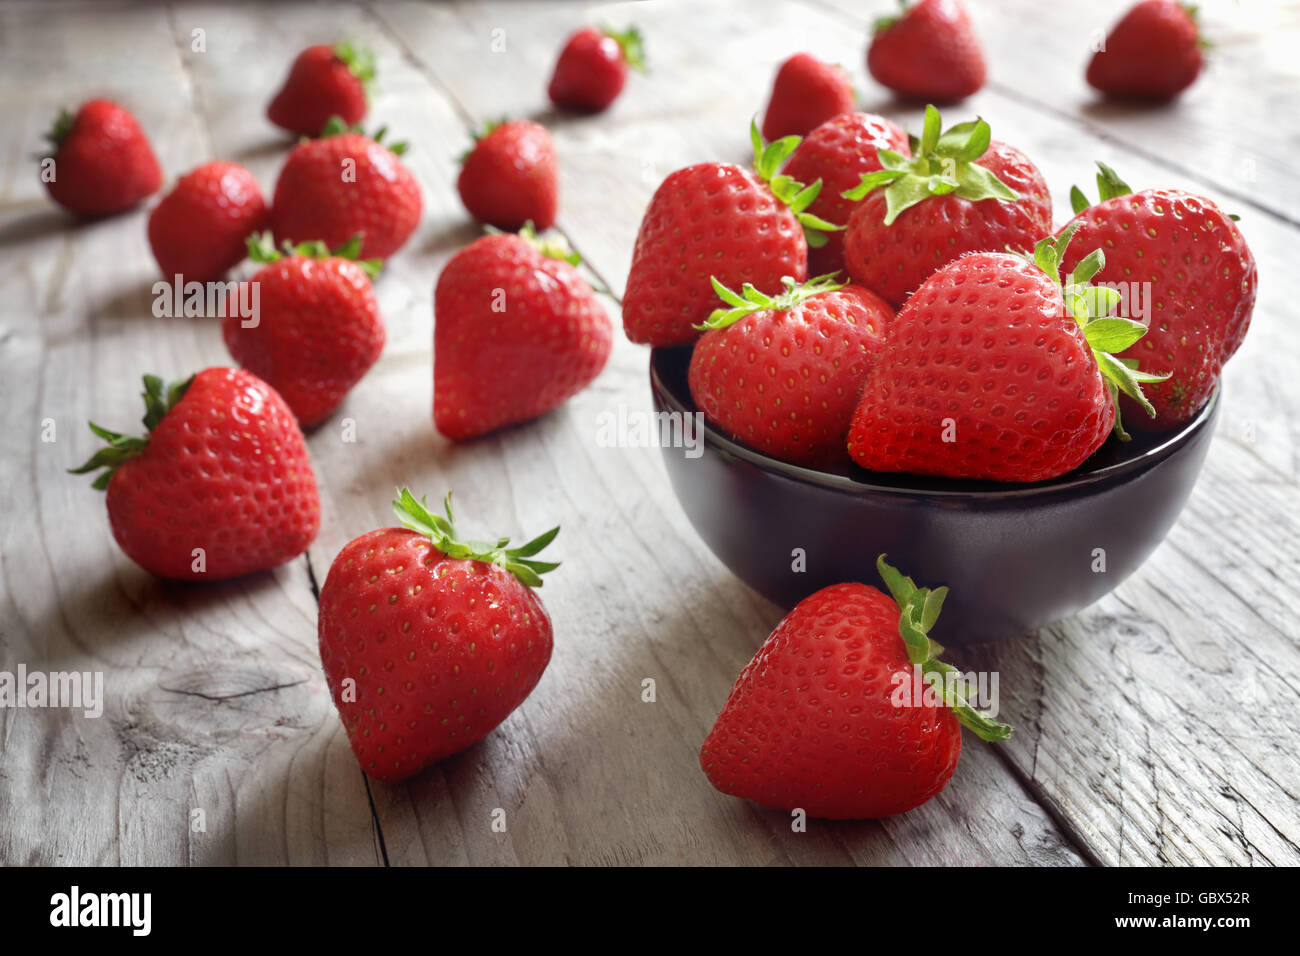 Strawberries fresh picked in a bowl on wood table antioxidant organic superfood concept for healthy eating and nutrition Stock Photo